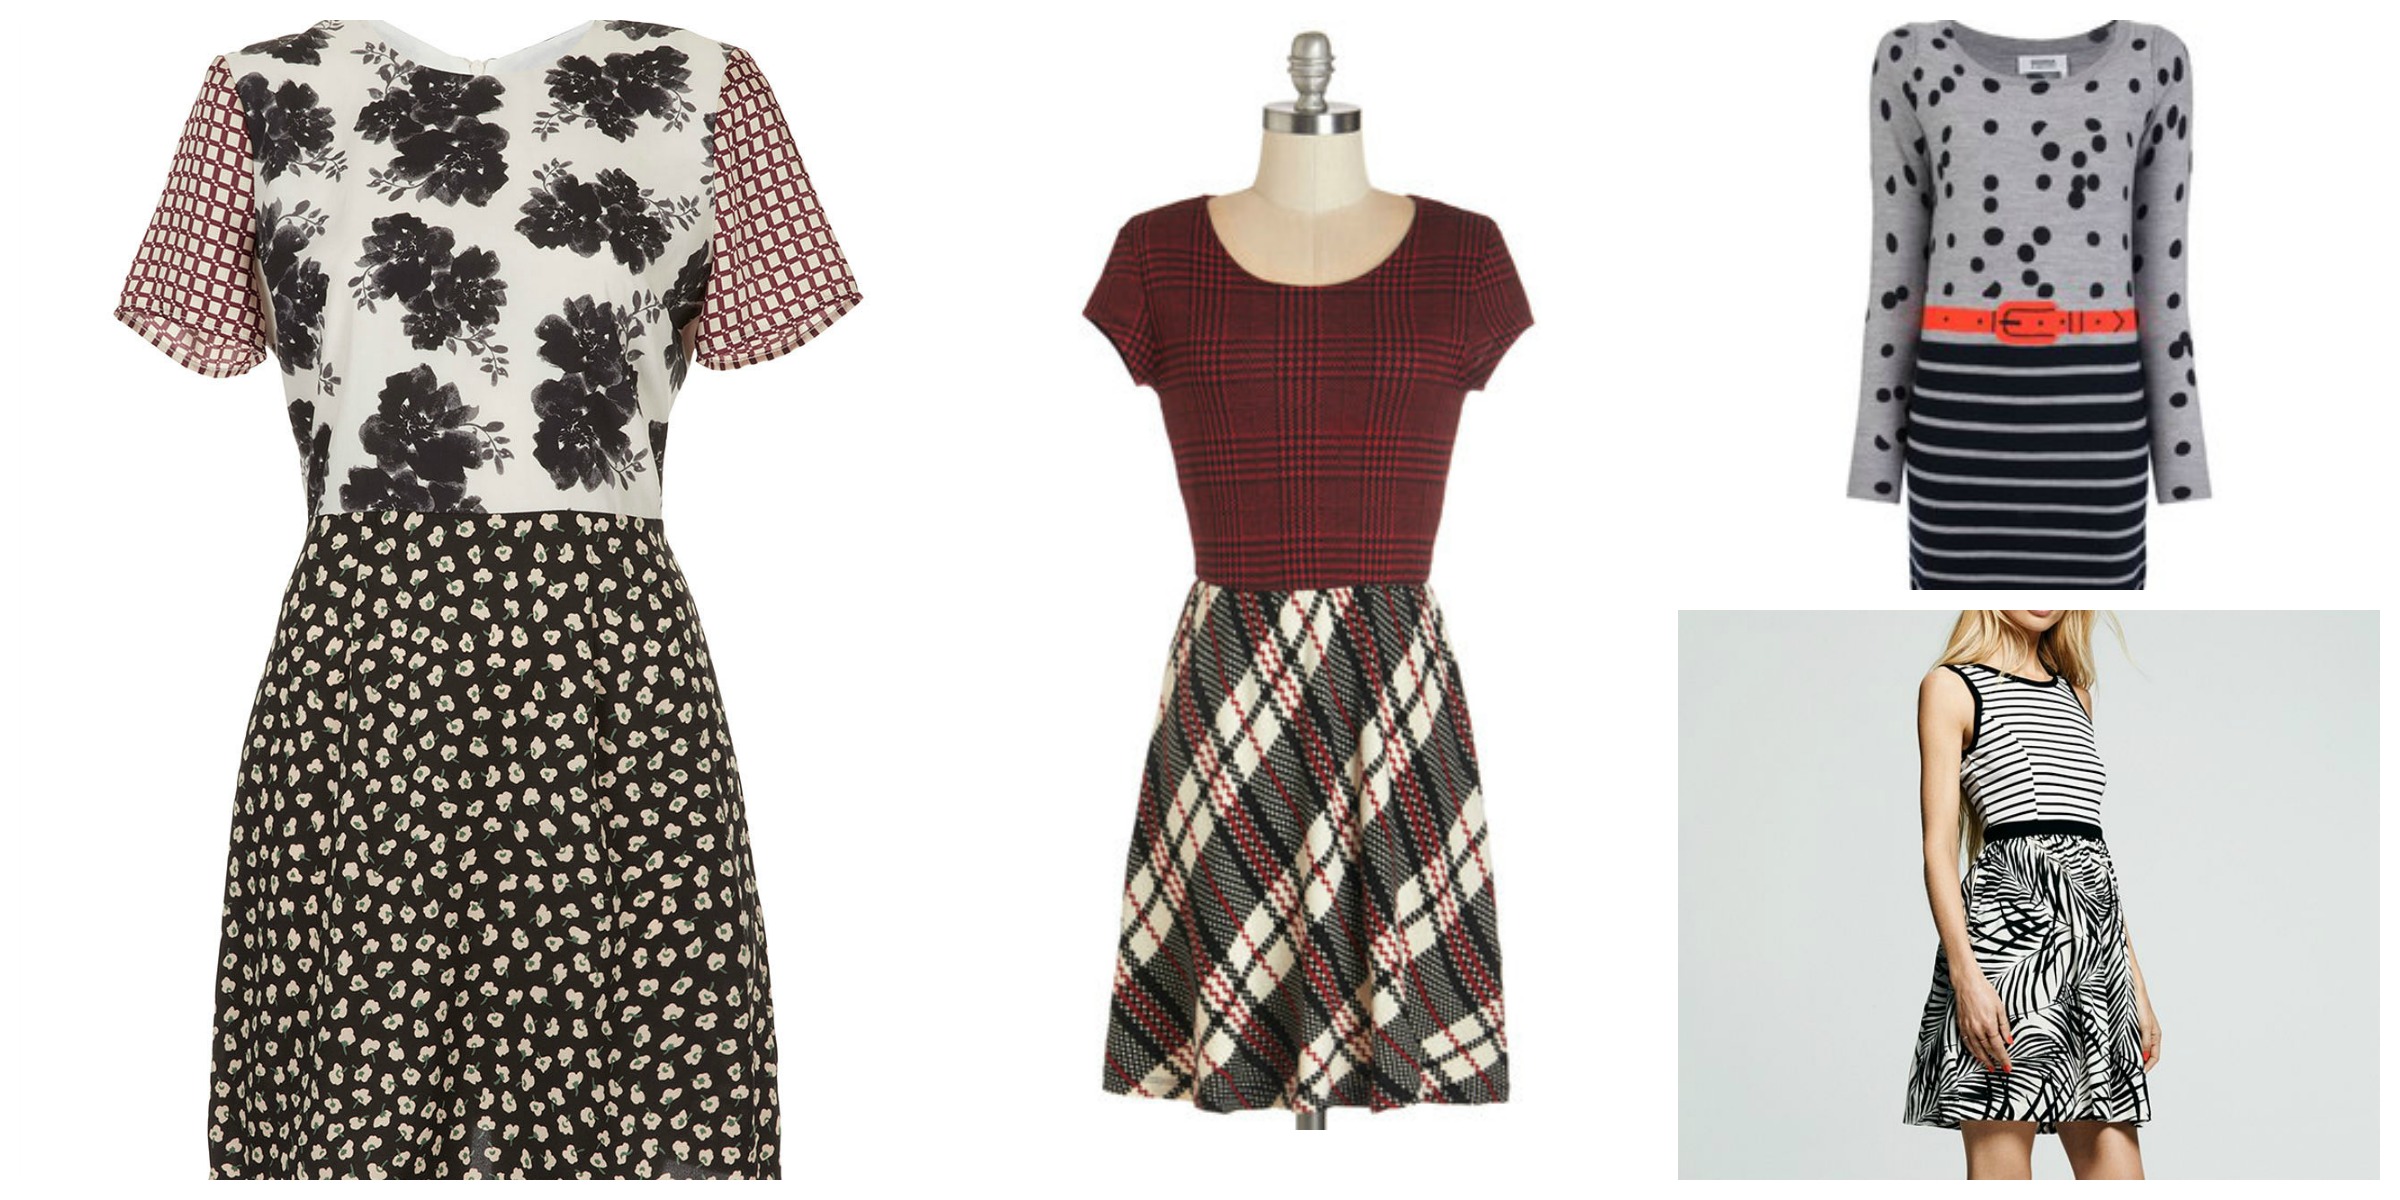 Fashion Fridays: How To Mix Prints | The Domestic Rebel